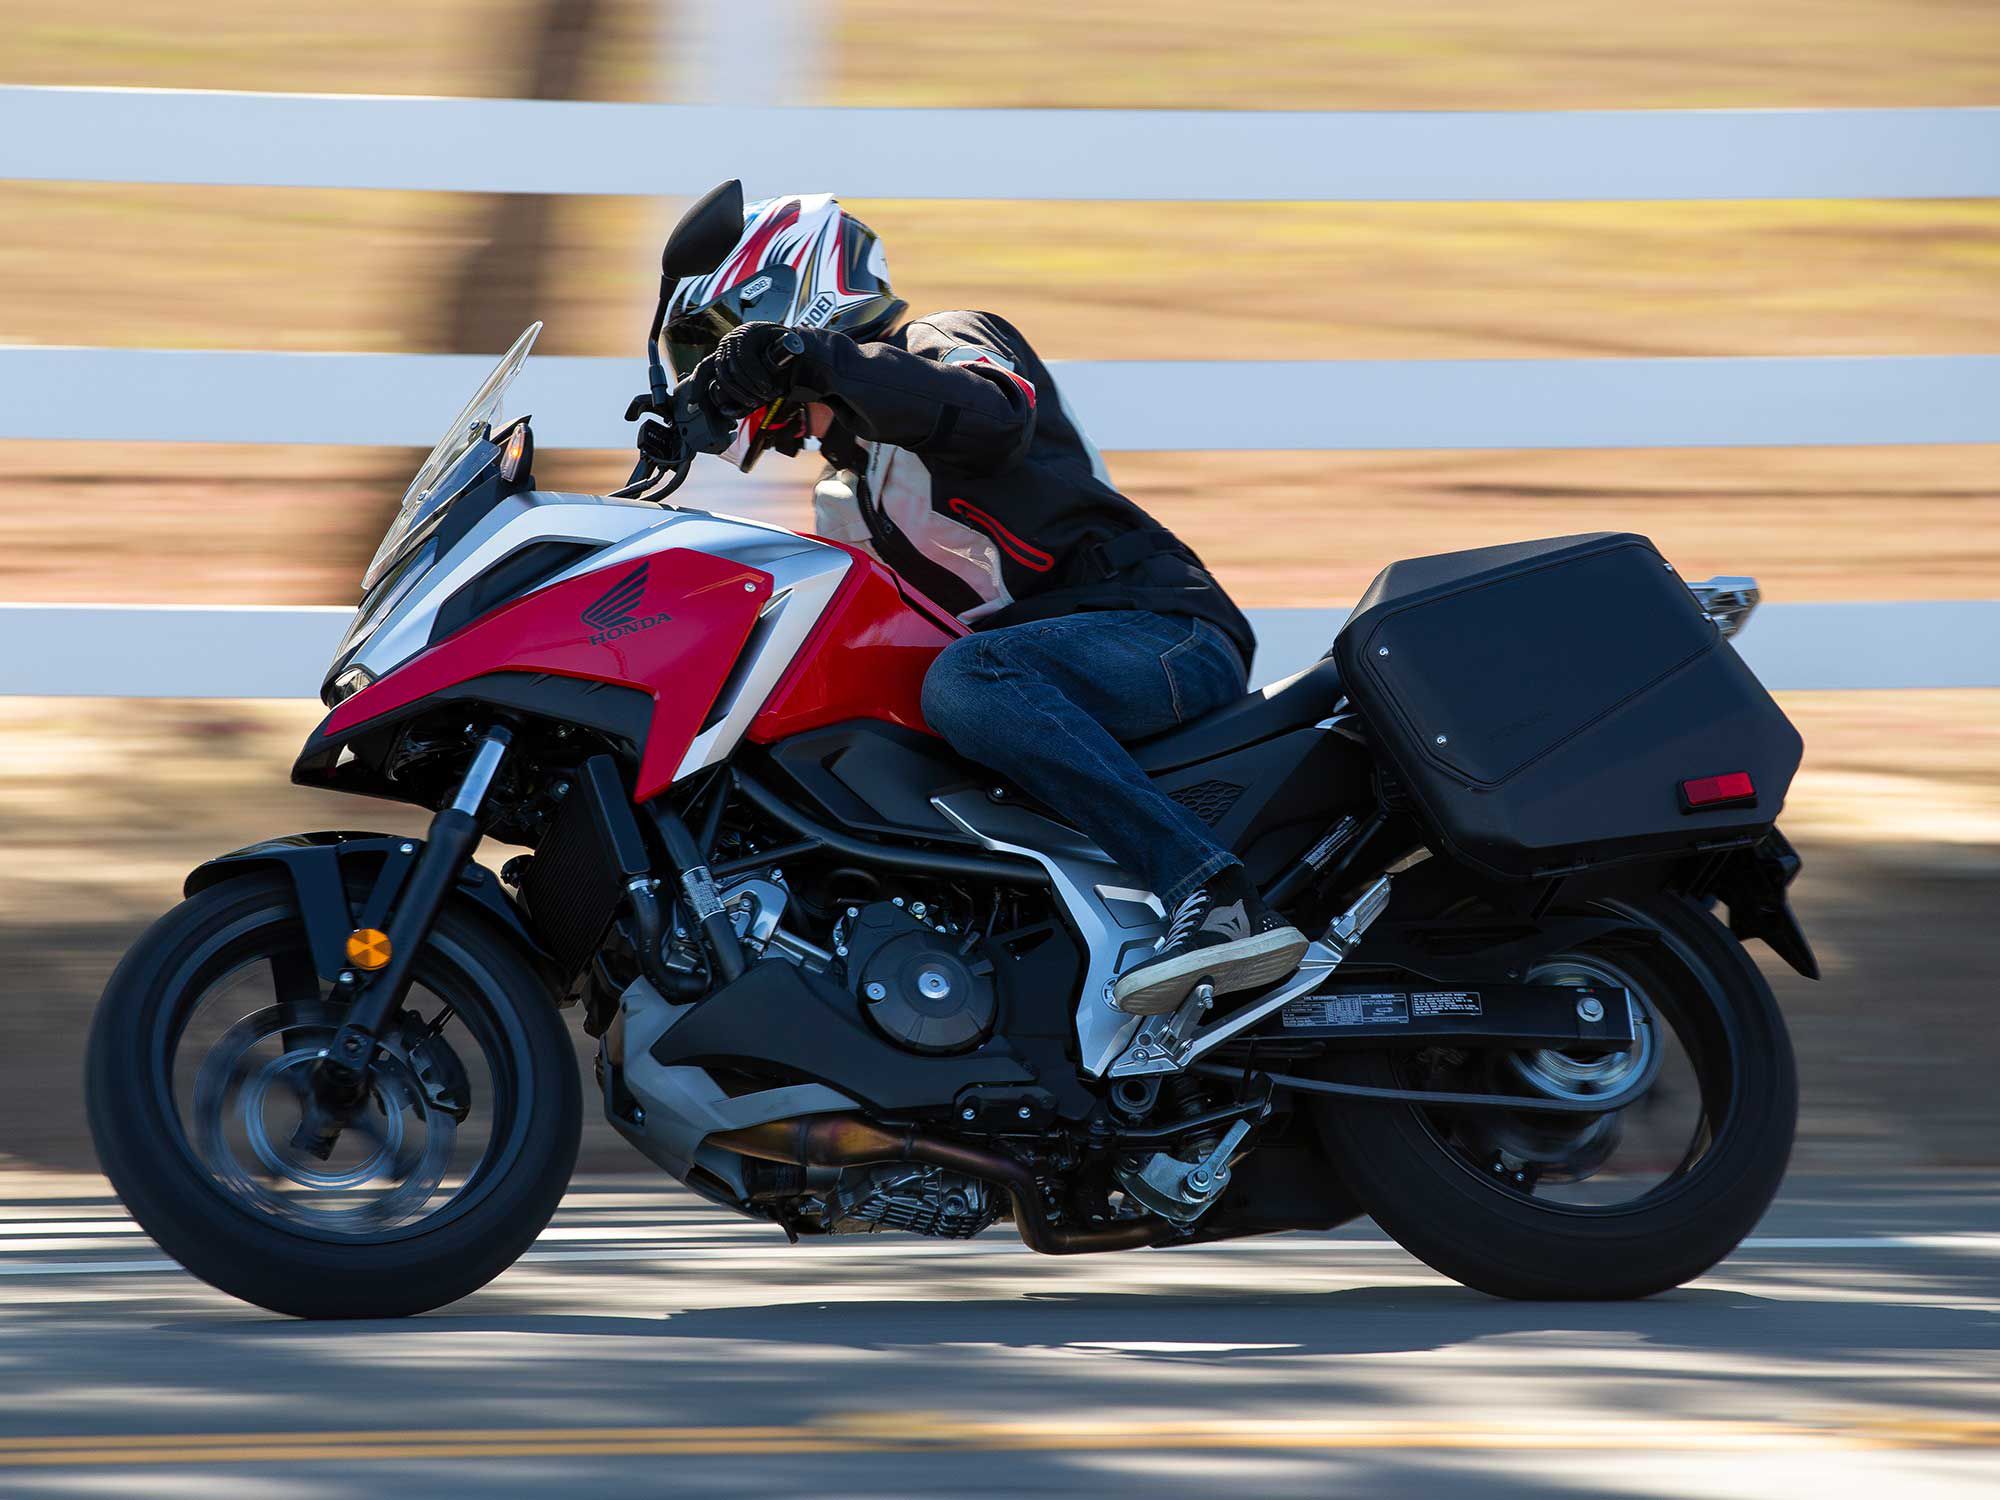 The NC750X makes for a great commuter, but won’t shy away from longer rides or a fun day on twisty canyon roads.